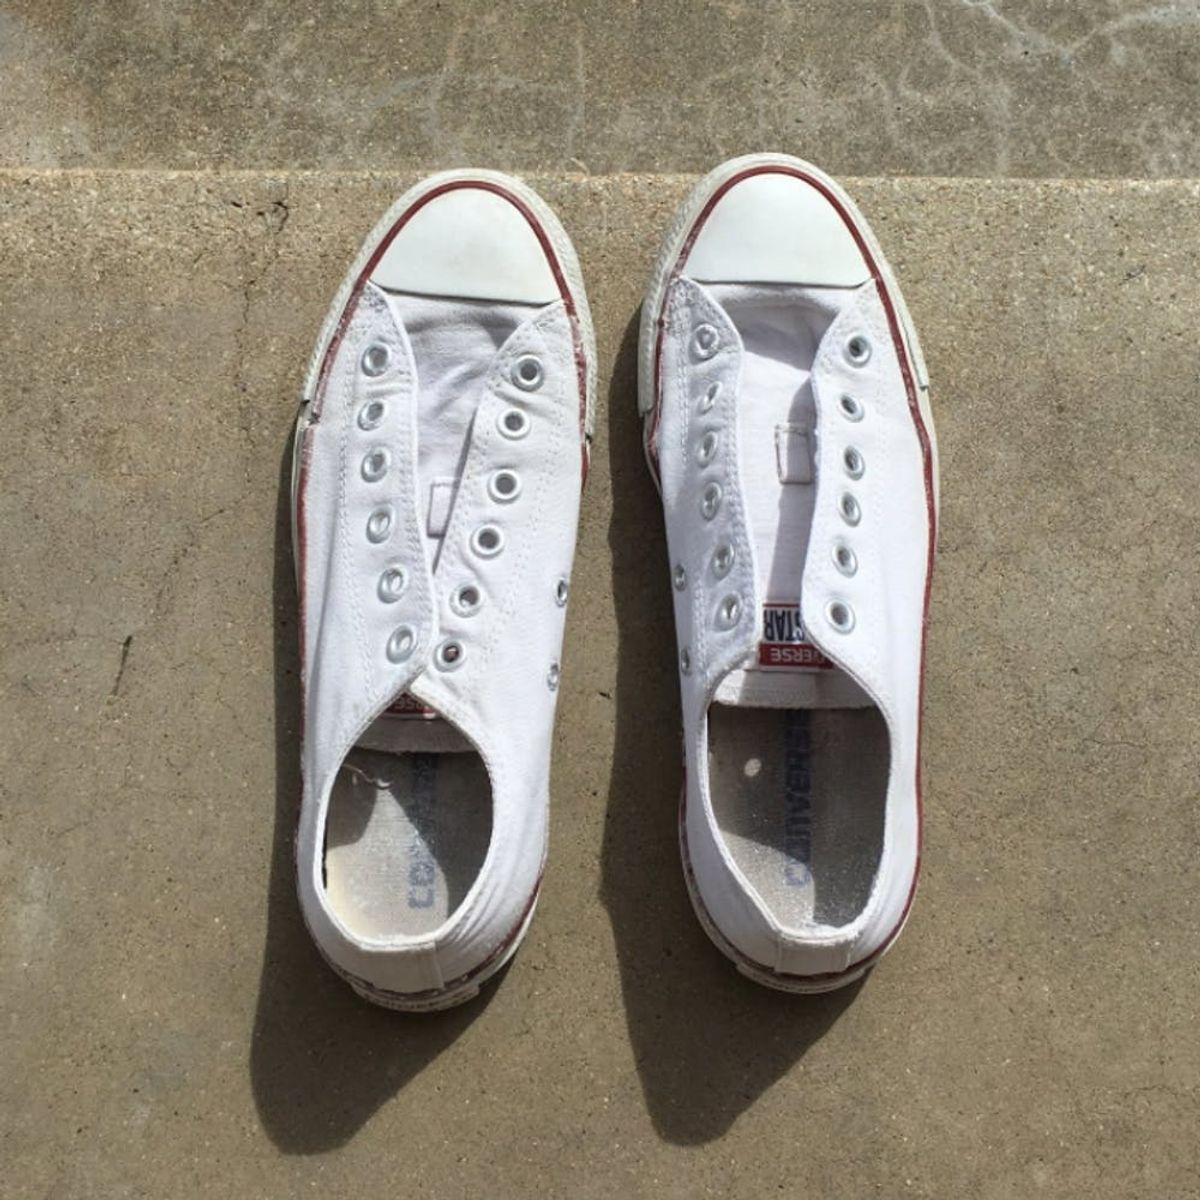 This Viral Tweet Shows Exactly How to Make White Shoes Look New Again